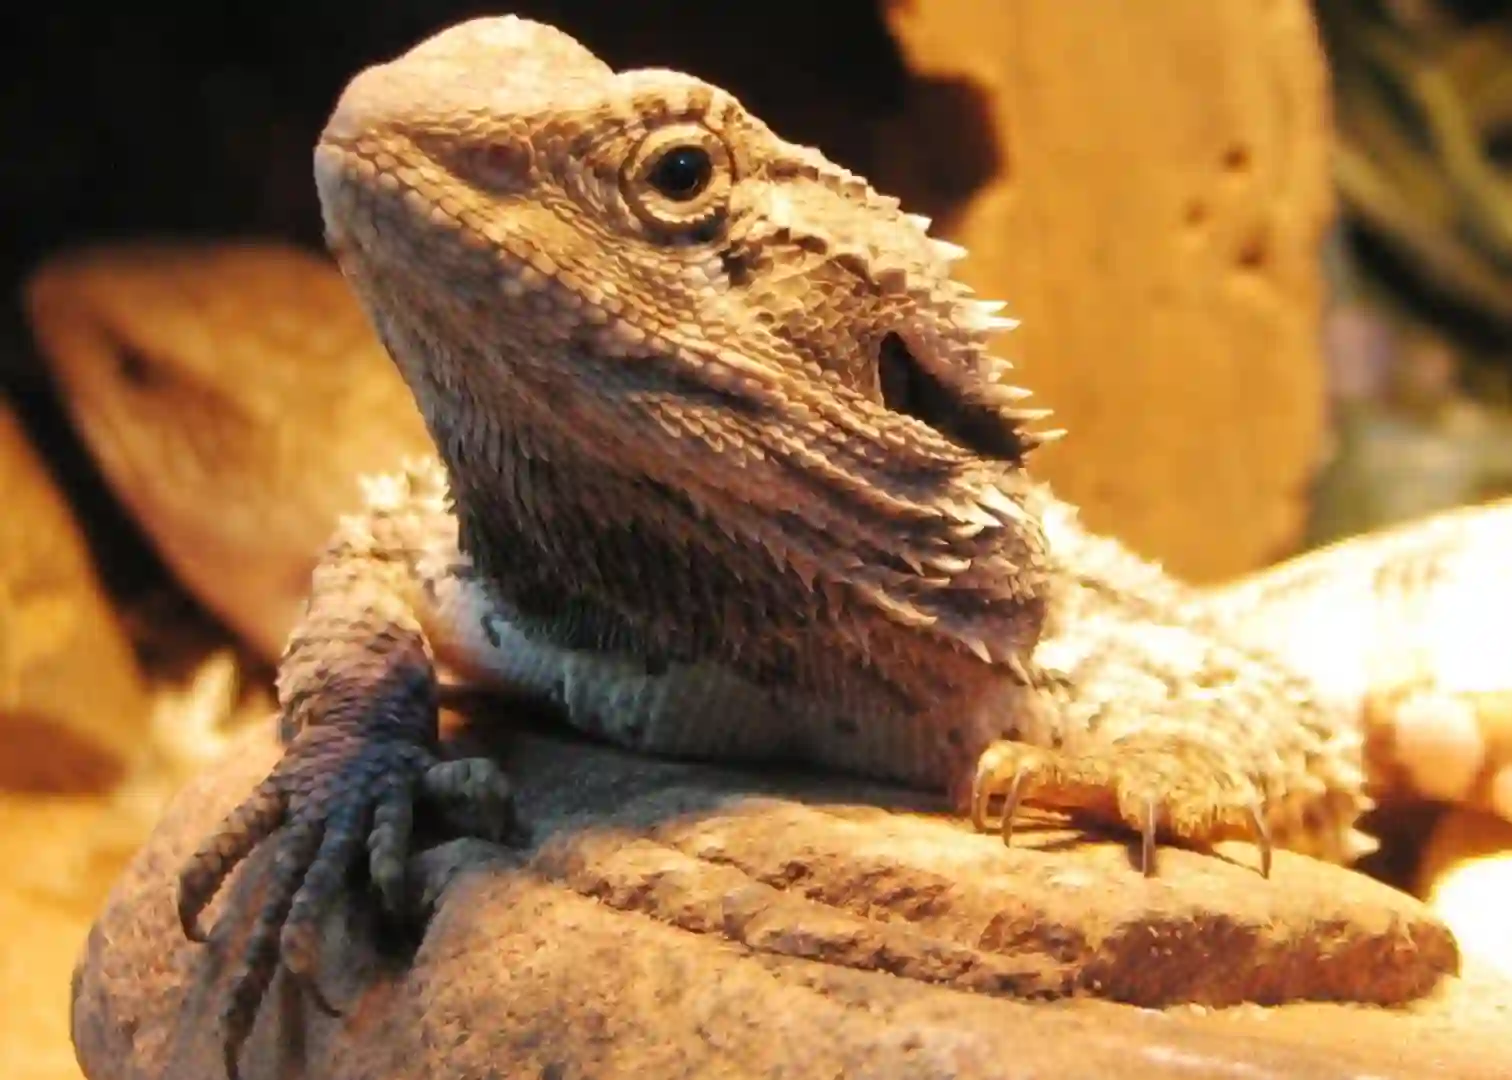 Can Bearded Dragons Eat Frozen Vegetables?